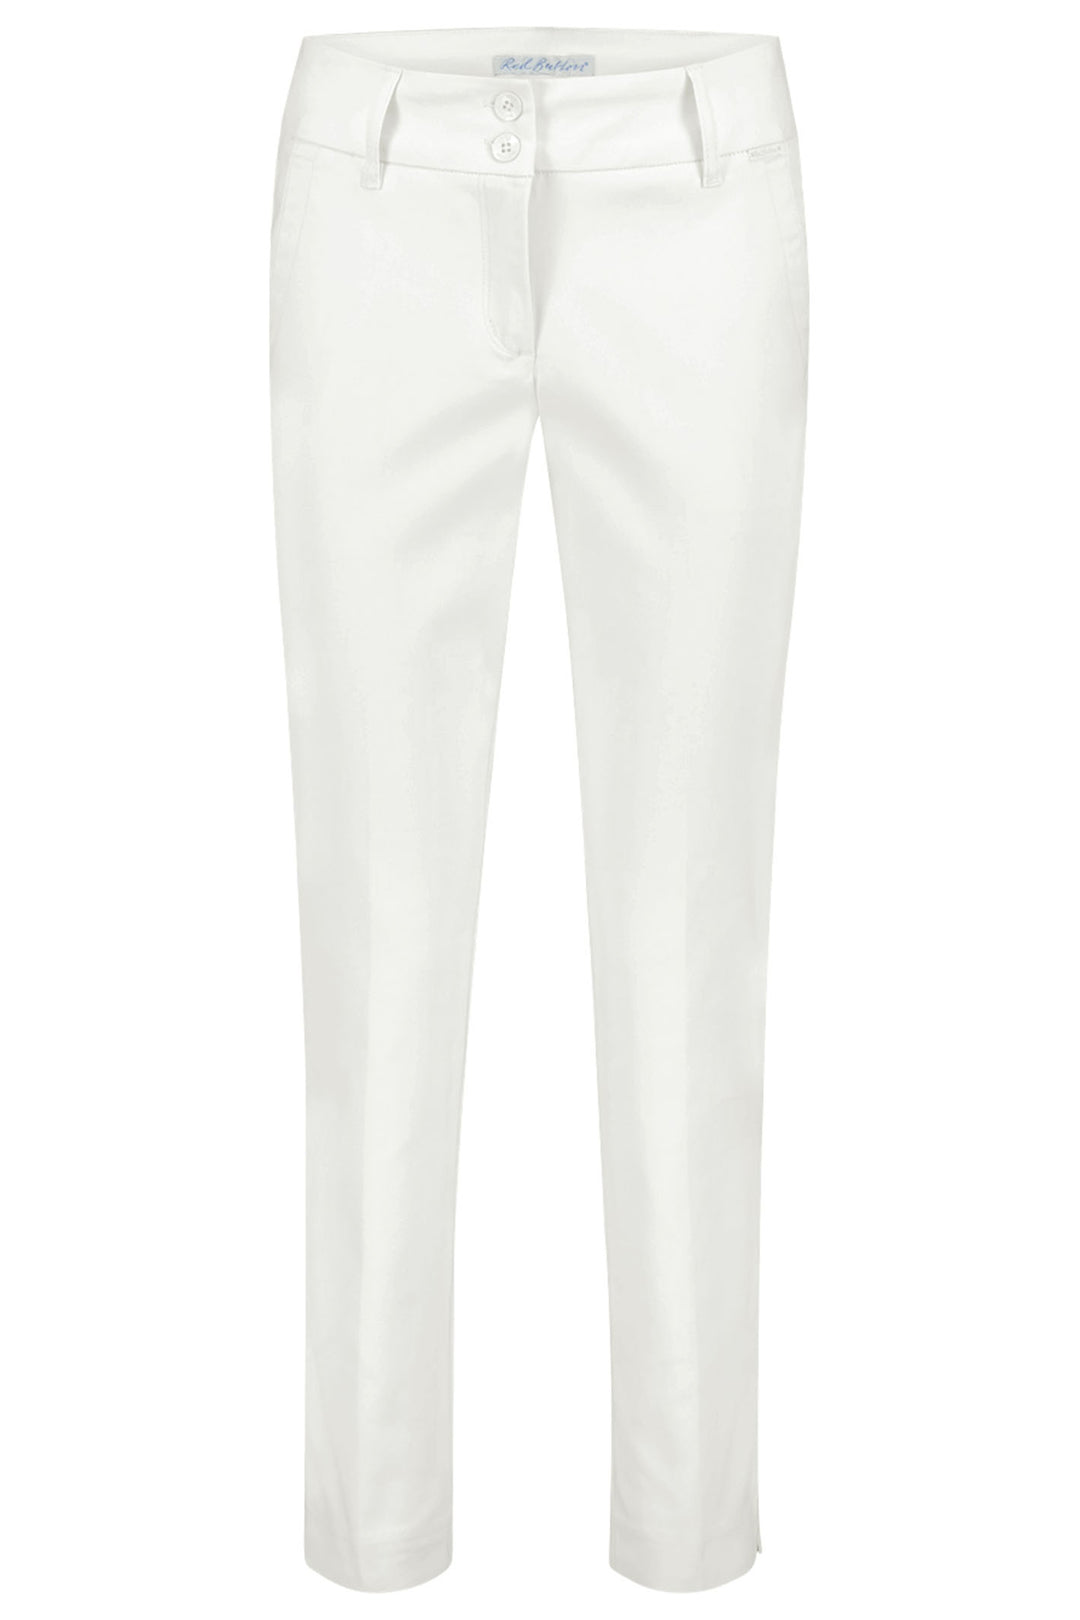 Red Button SRB4205 Diana Off White Smart Trousers 72cm - Olivia Grace Fashion